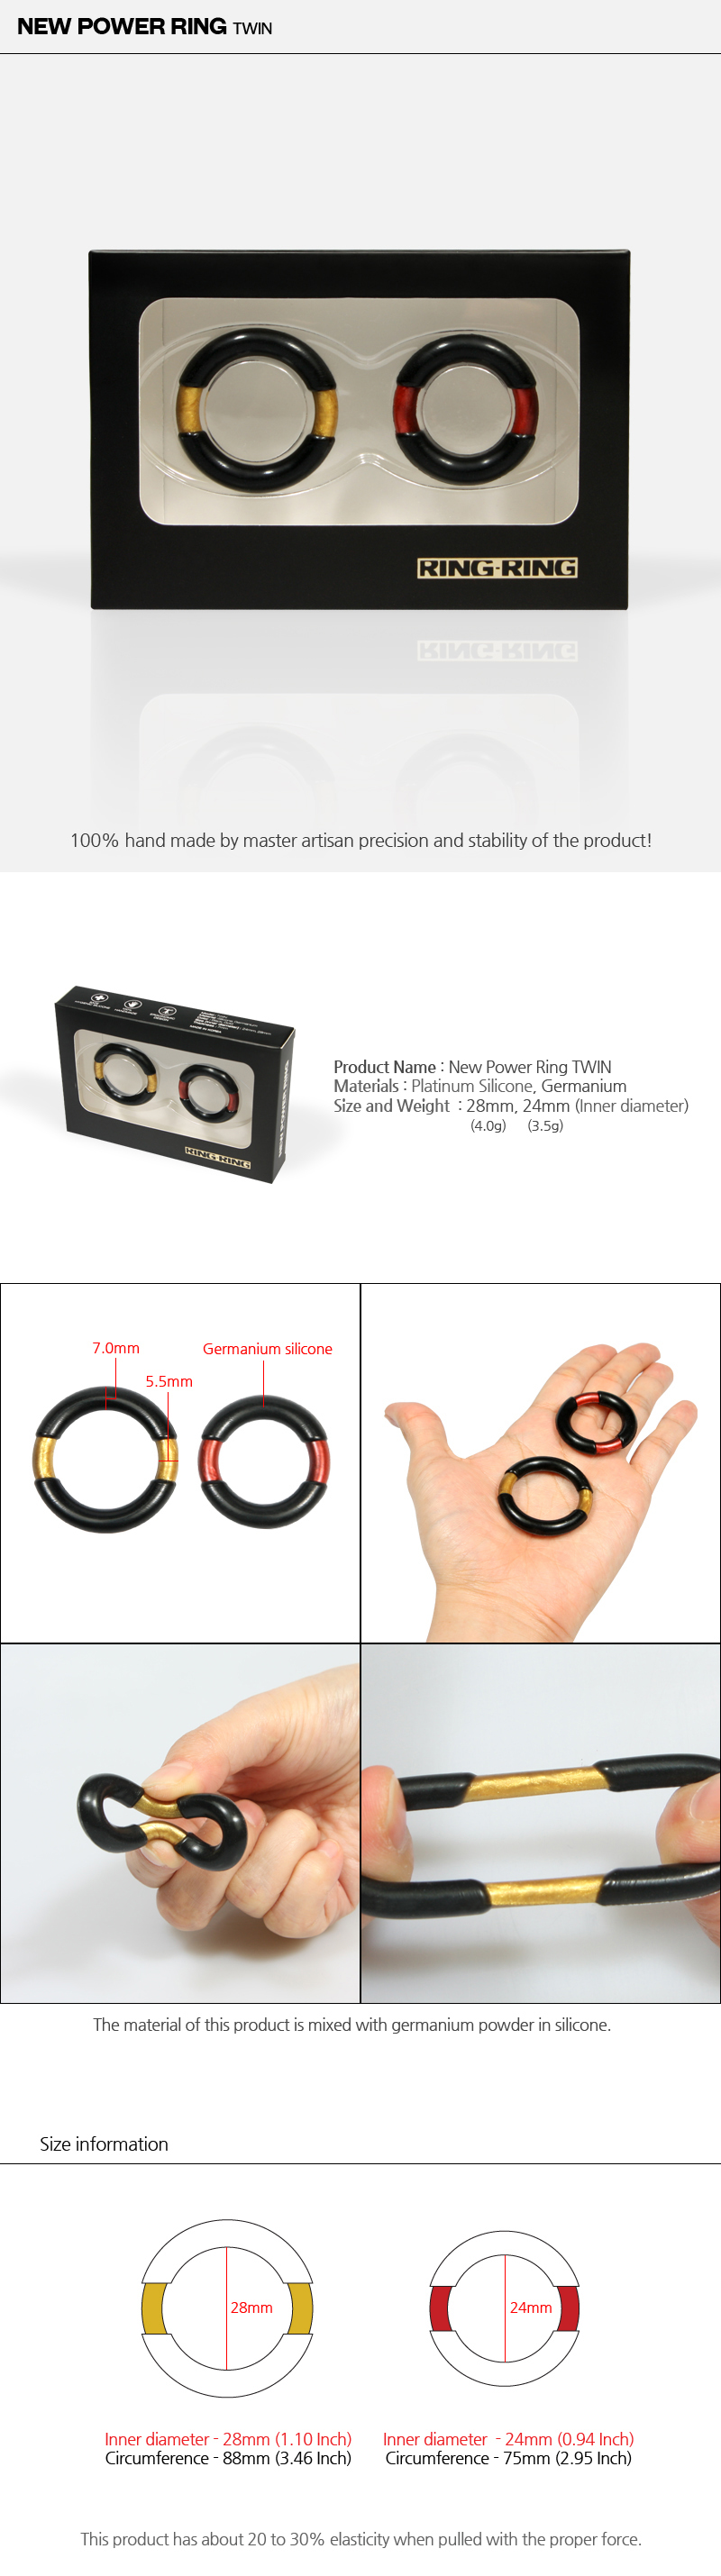 New Power Ring G, Germanium Silicone Penis Ring, Impotence, Erection Aid  Ring